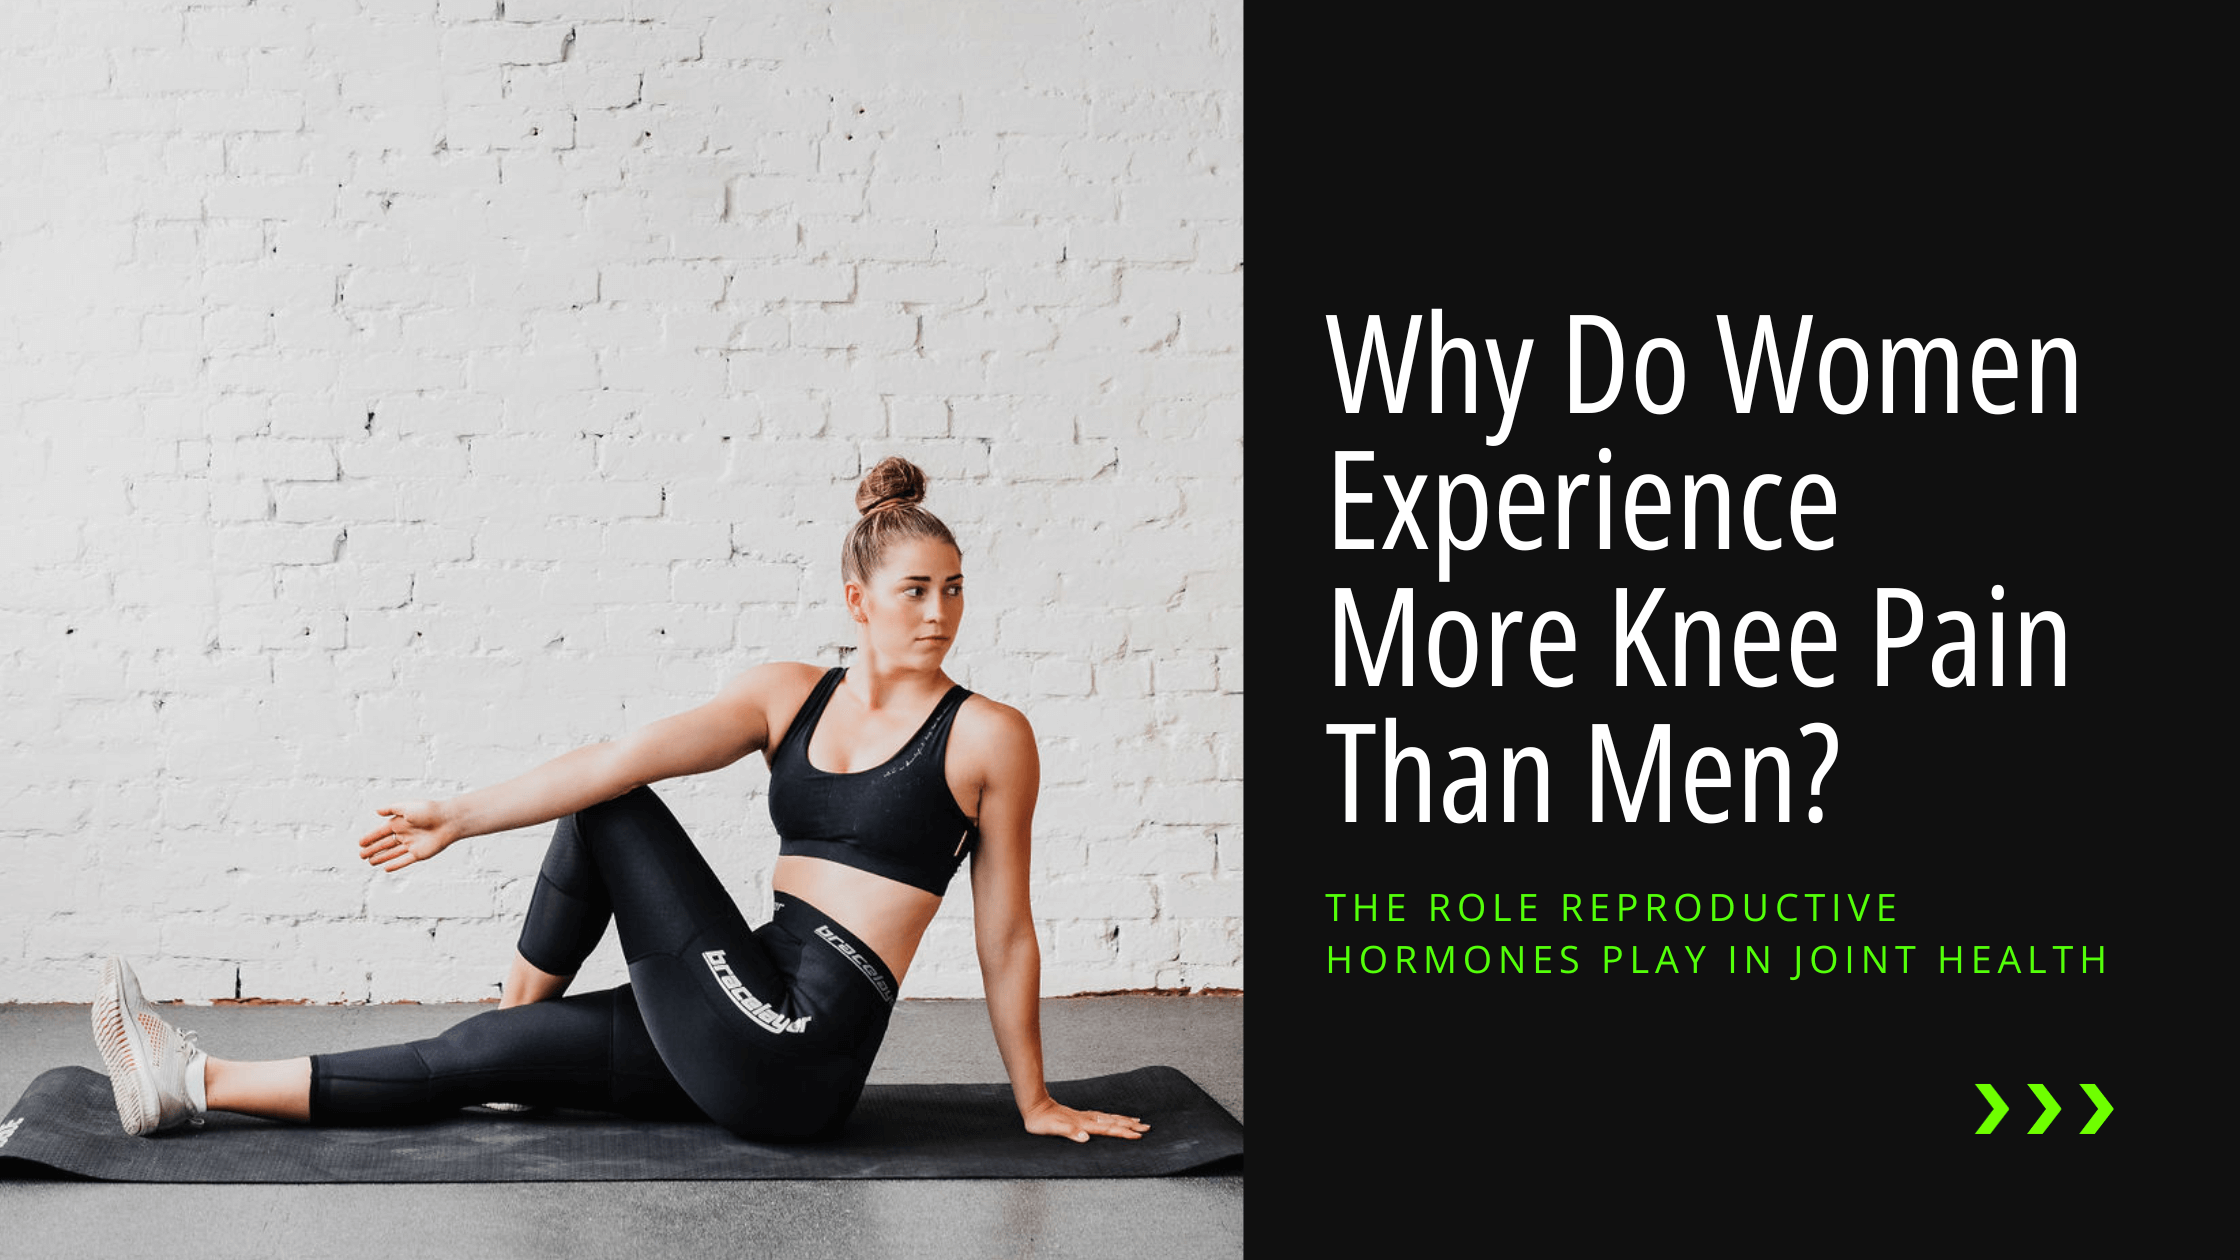 Blog header for "Why do women experience more knee pain than men," a post exploring the connection between women and knee pain. The image shows showing a woman in a twist yoga post on the left and the heading on the right of the graphic.